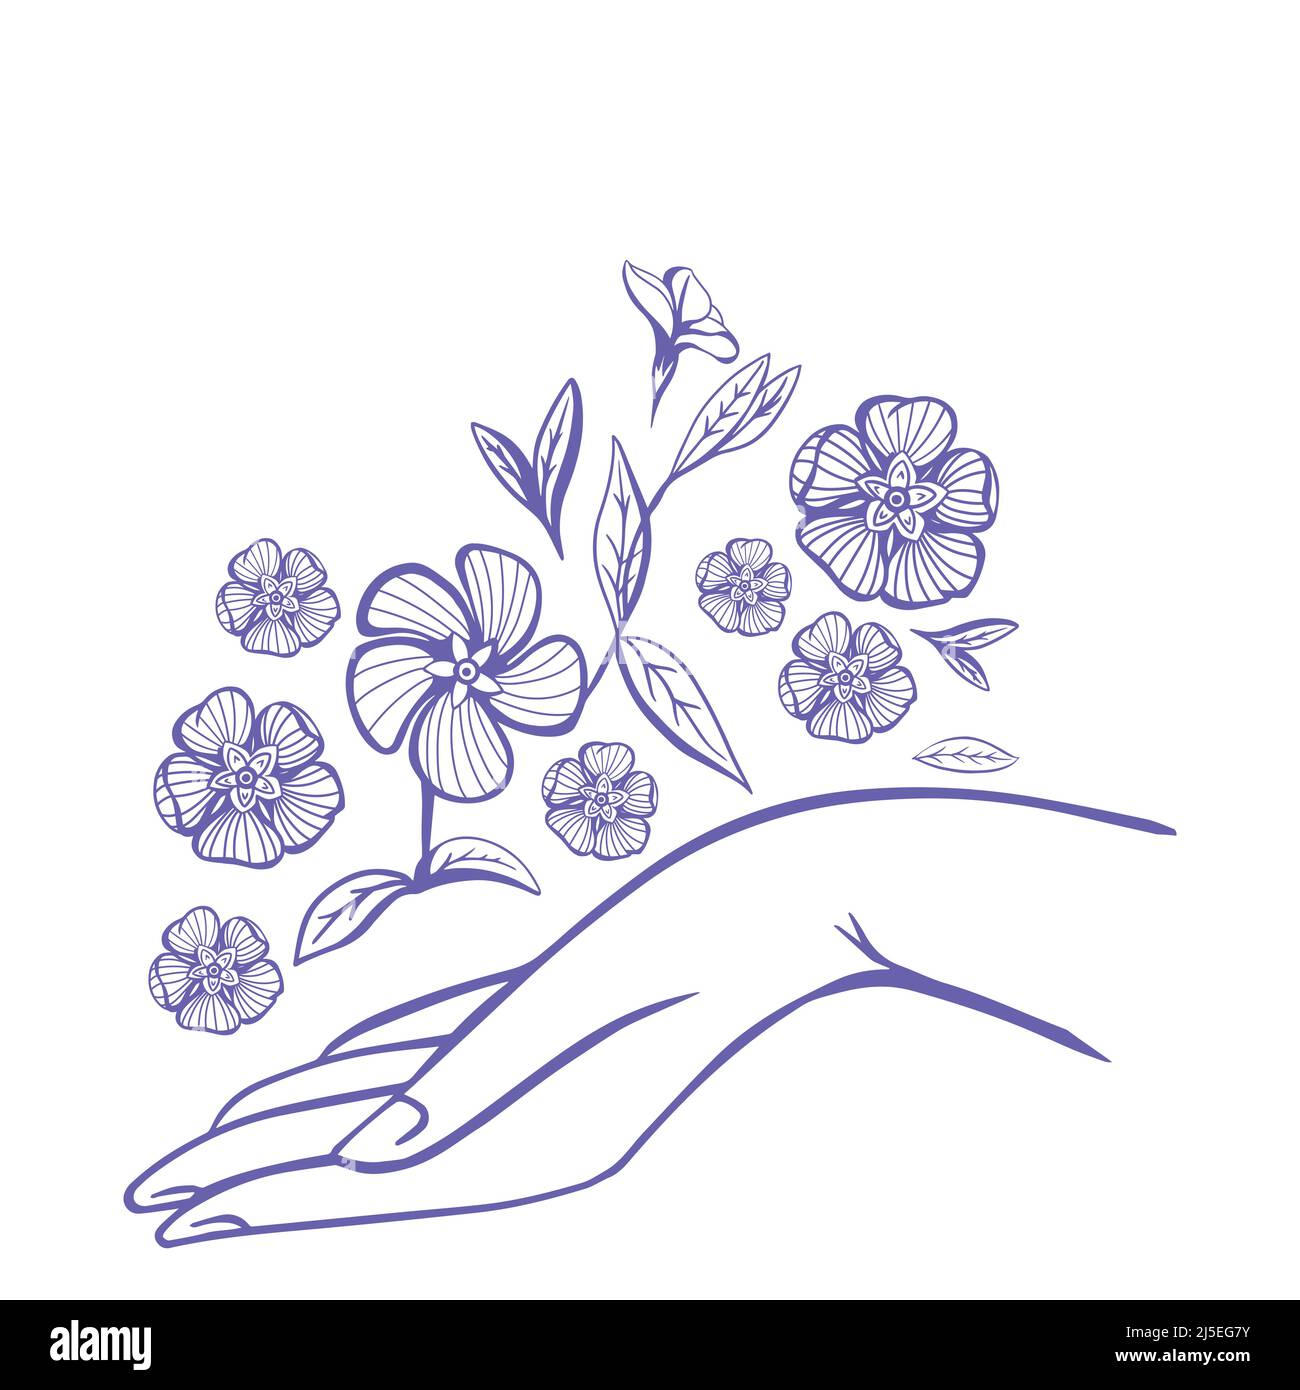 Periwinkle flowers over Women's Arm. Good for Feminine and Eco Friendly Products illustration Stock Vector